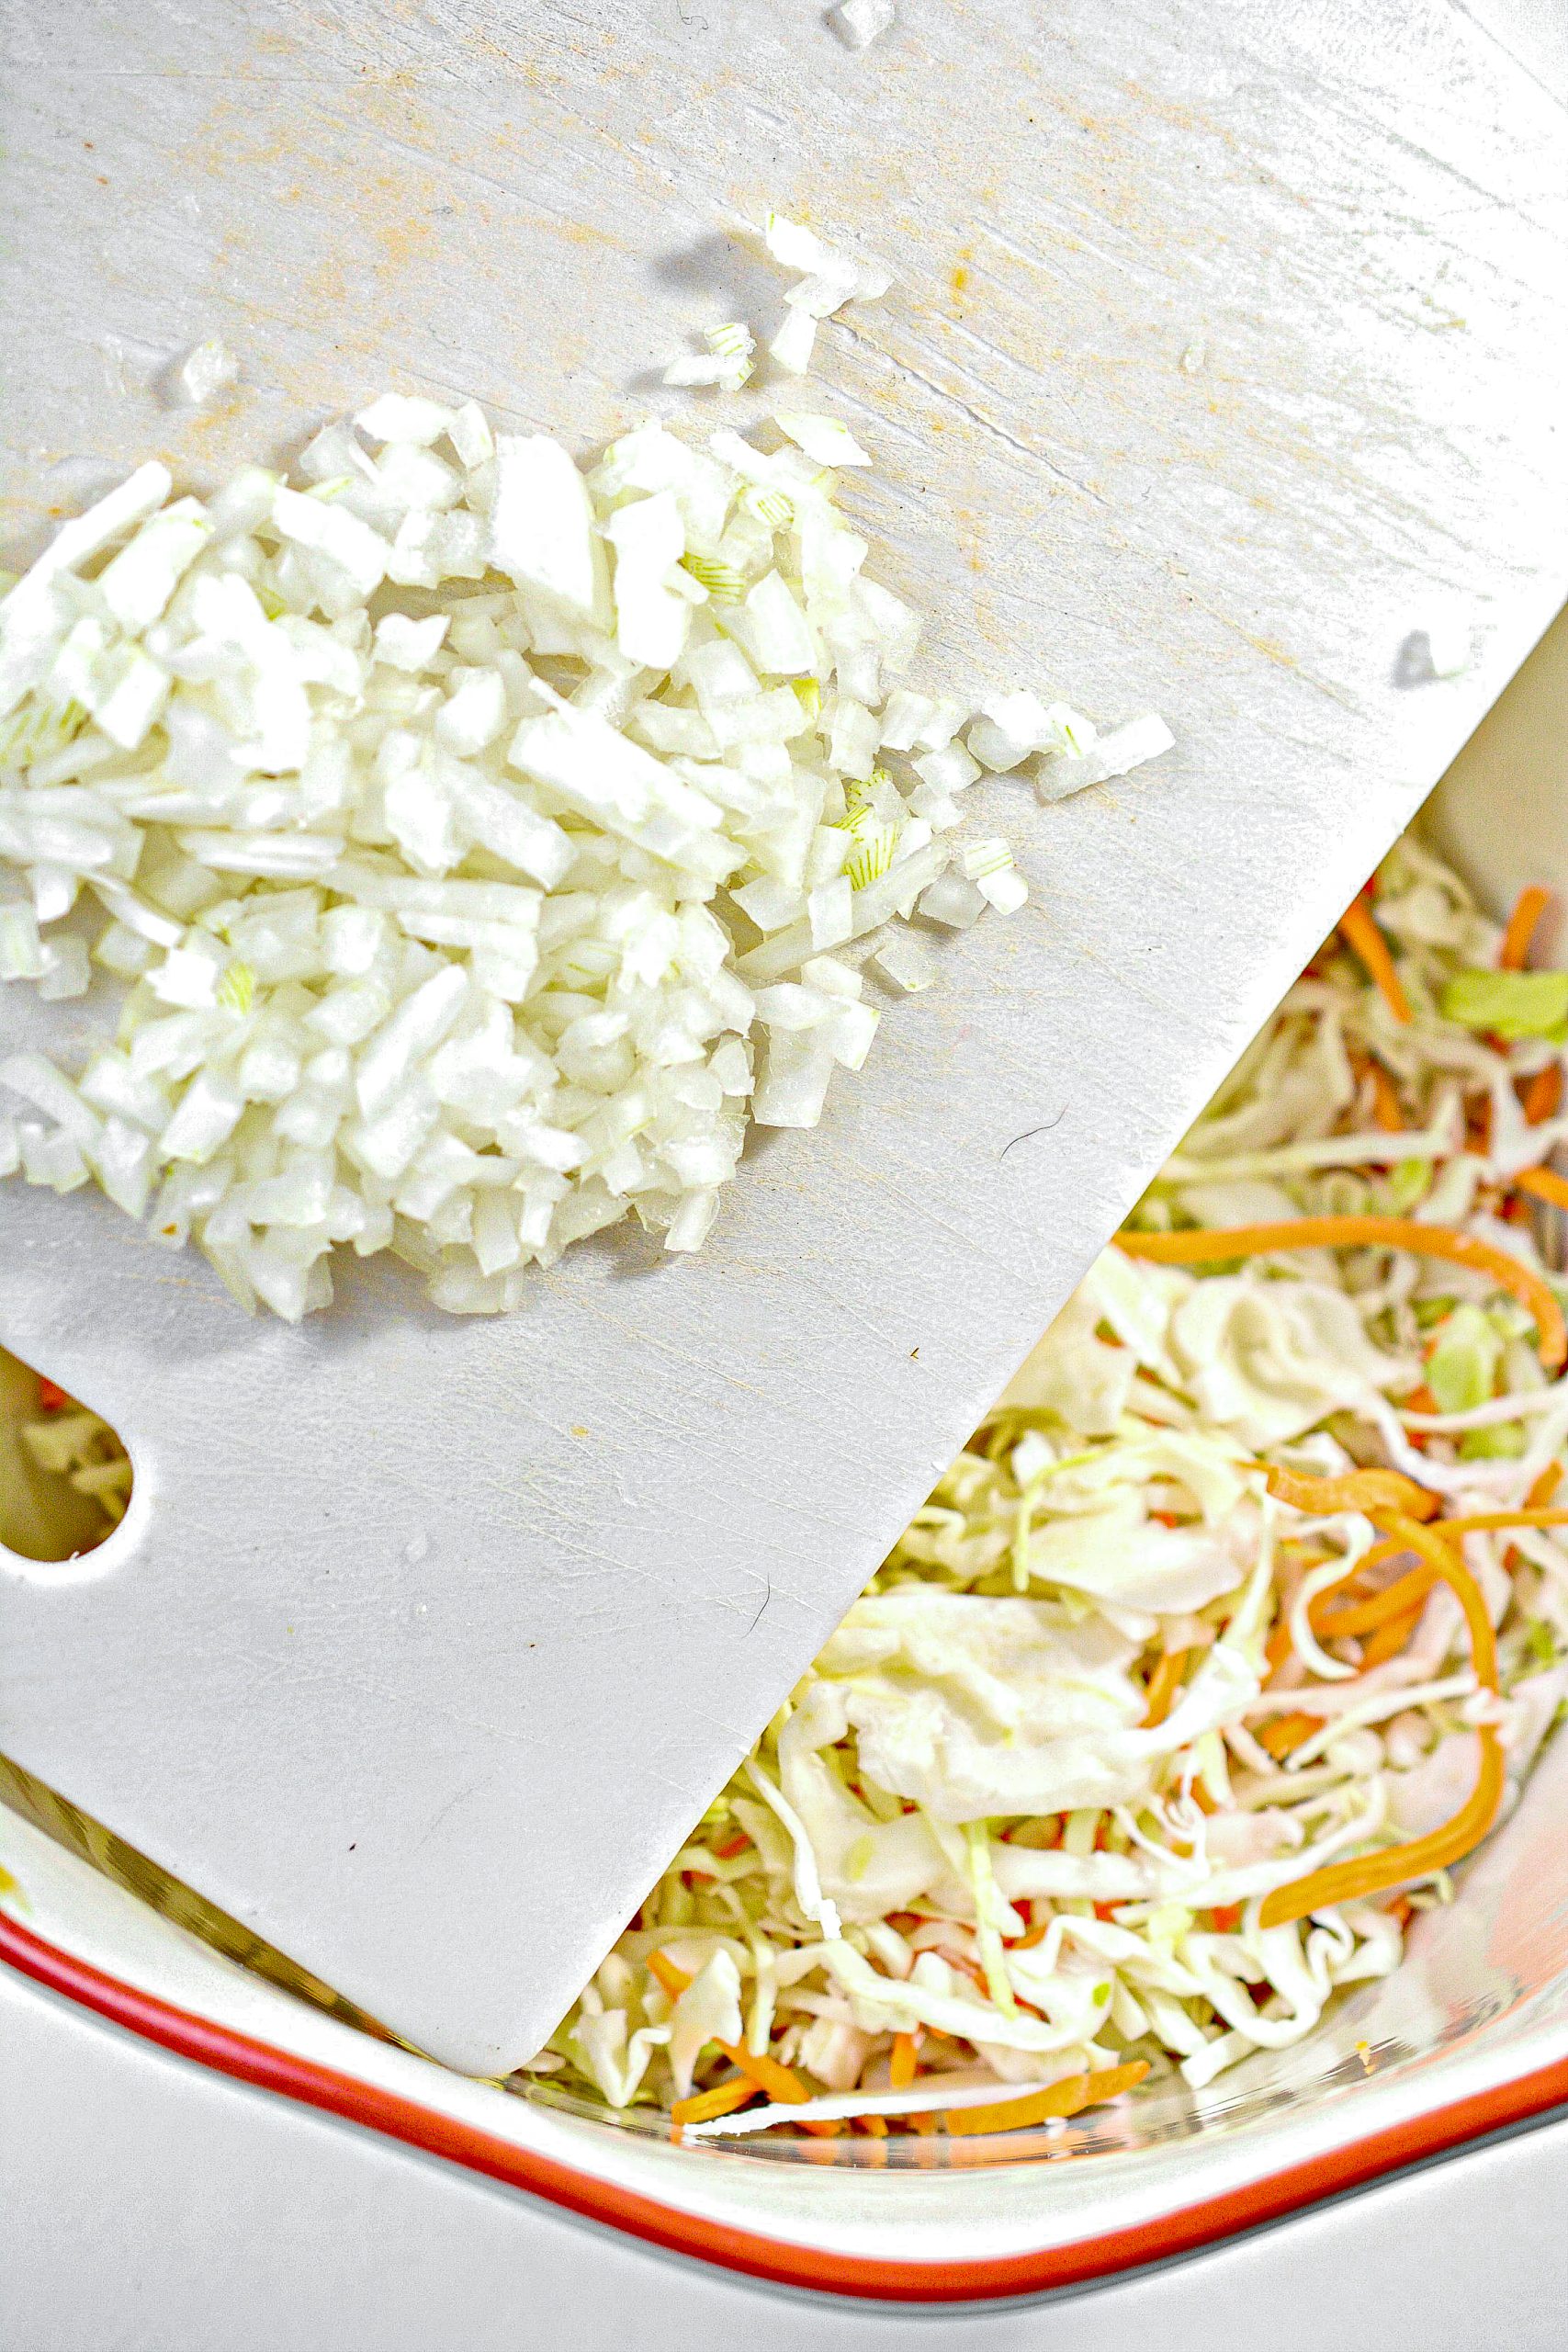 Place the cabbage, onions and carrots into a large mixing bowl, and mix to combine well.